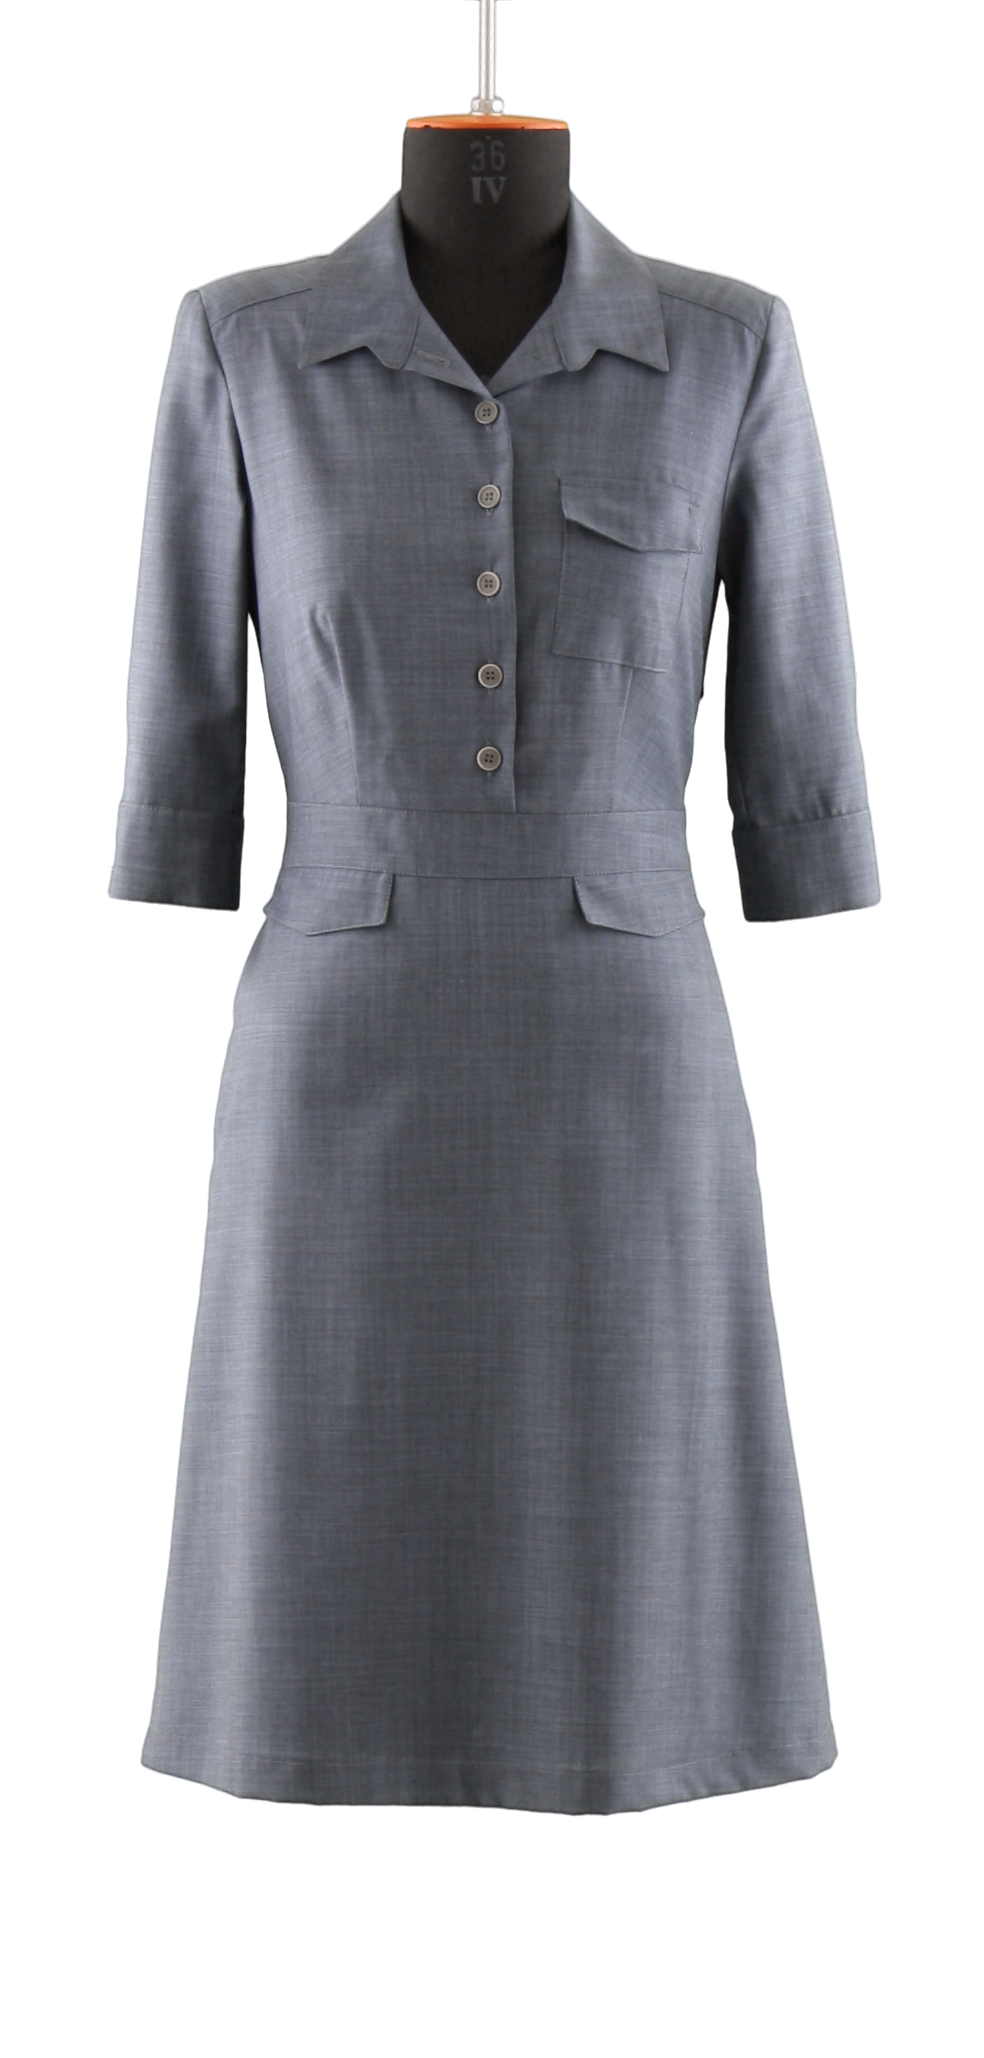 A simple grey, buttoned uniform dress belonging to the women collection with three quarter sleeves in frontal view on a headless mannequin with cutout background.